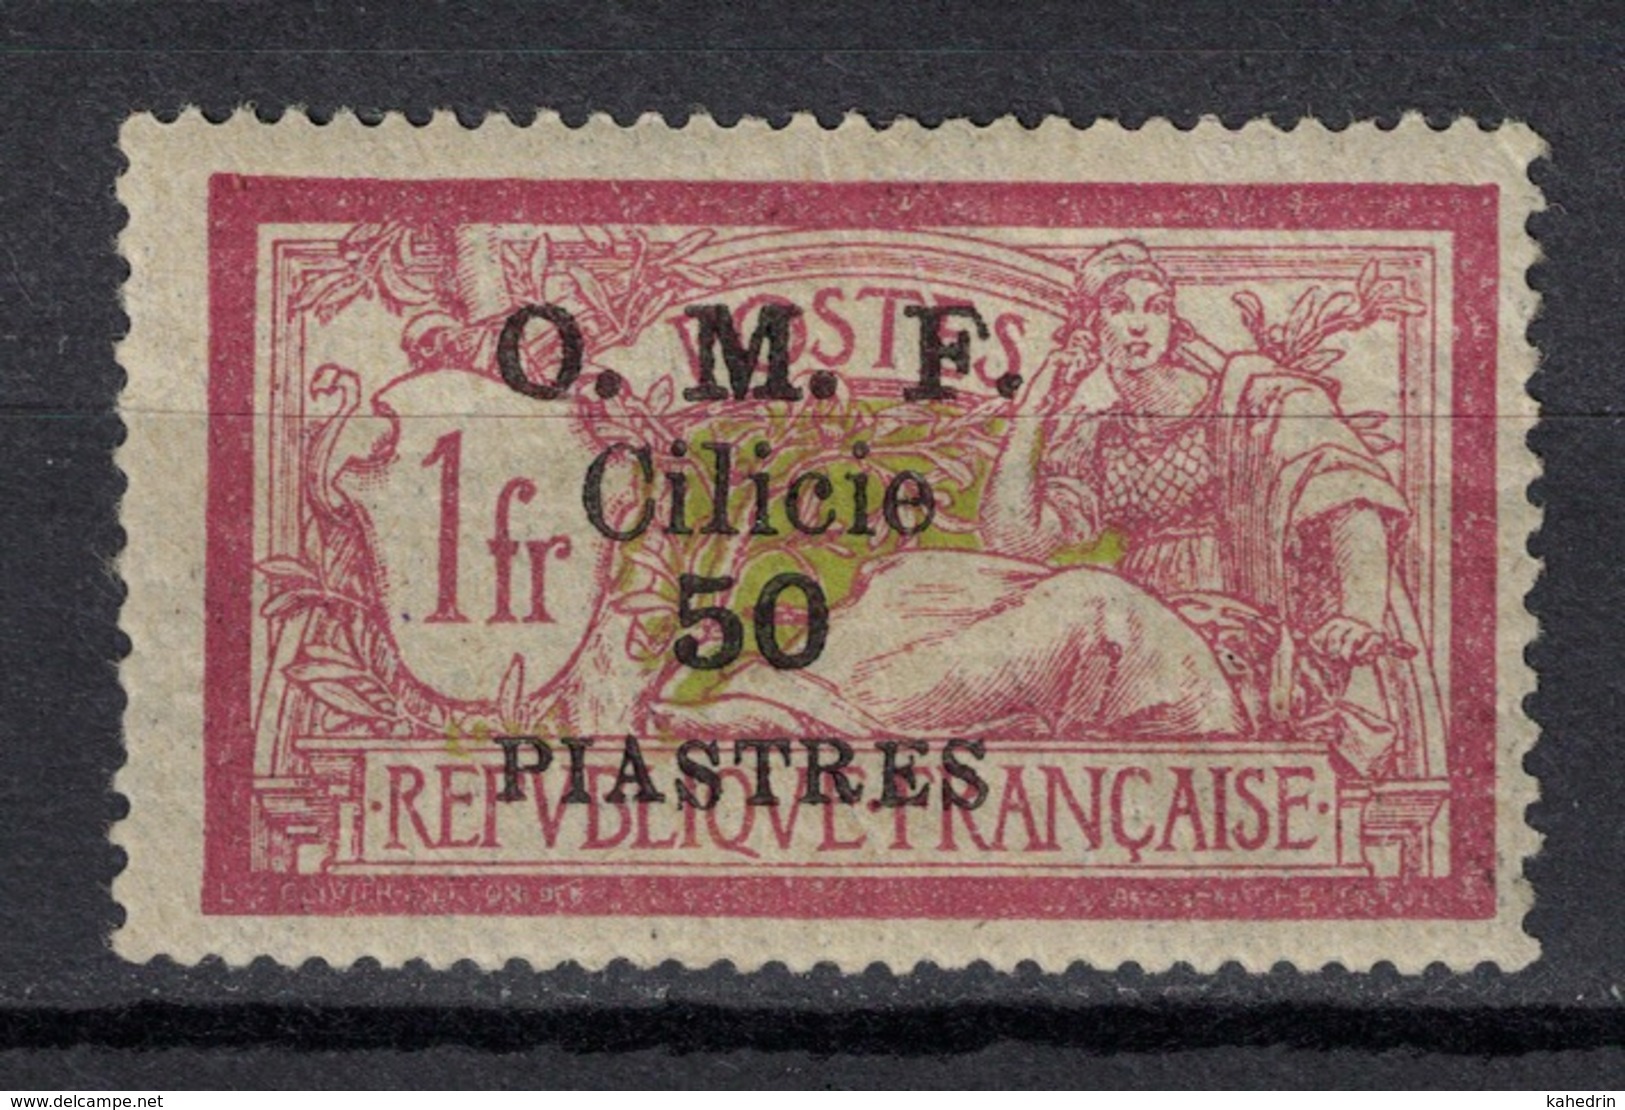 France Turkey Cilicie 1920, Overprint / Surcharge: OMF 50 P / 1 FR *, MH - Ungebraucht